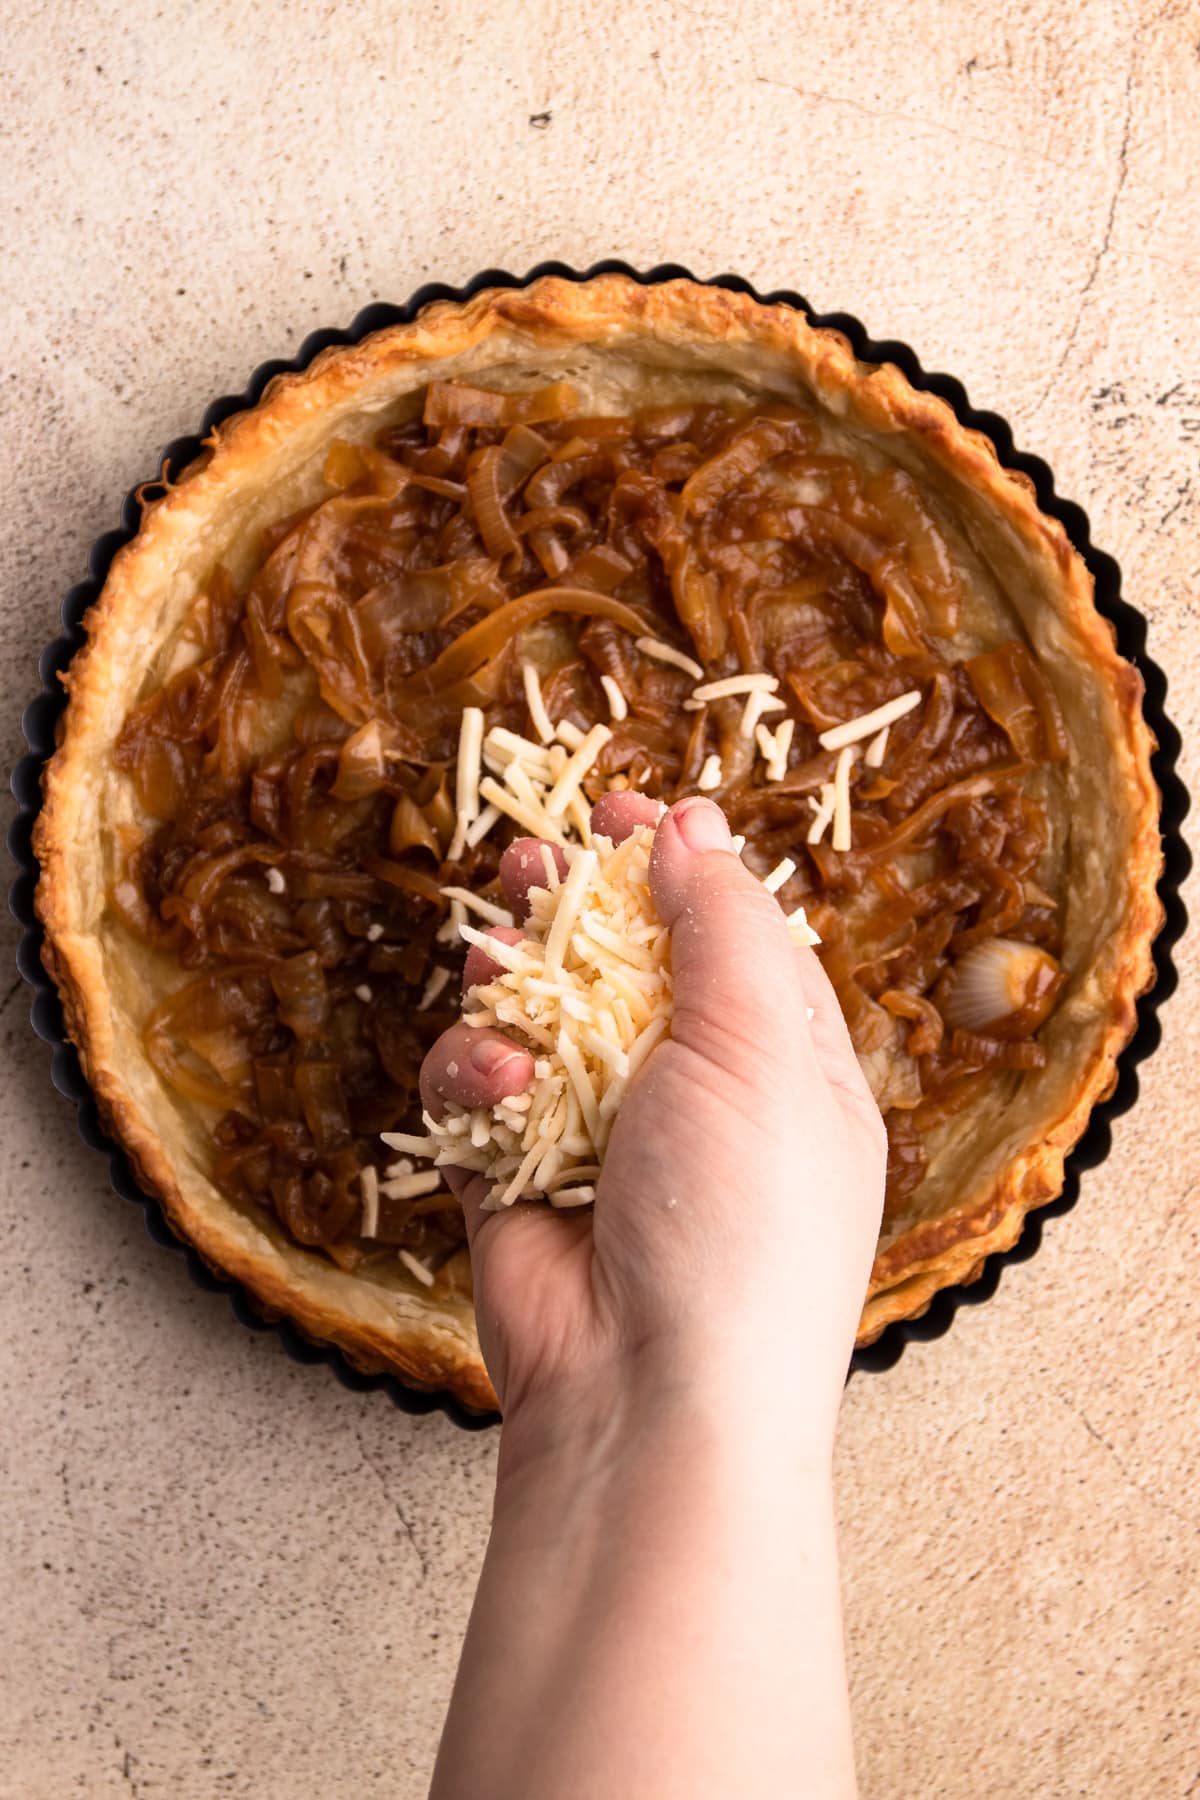 Putting cheese in a caramelized onion quiche.